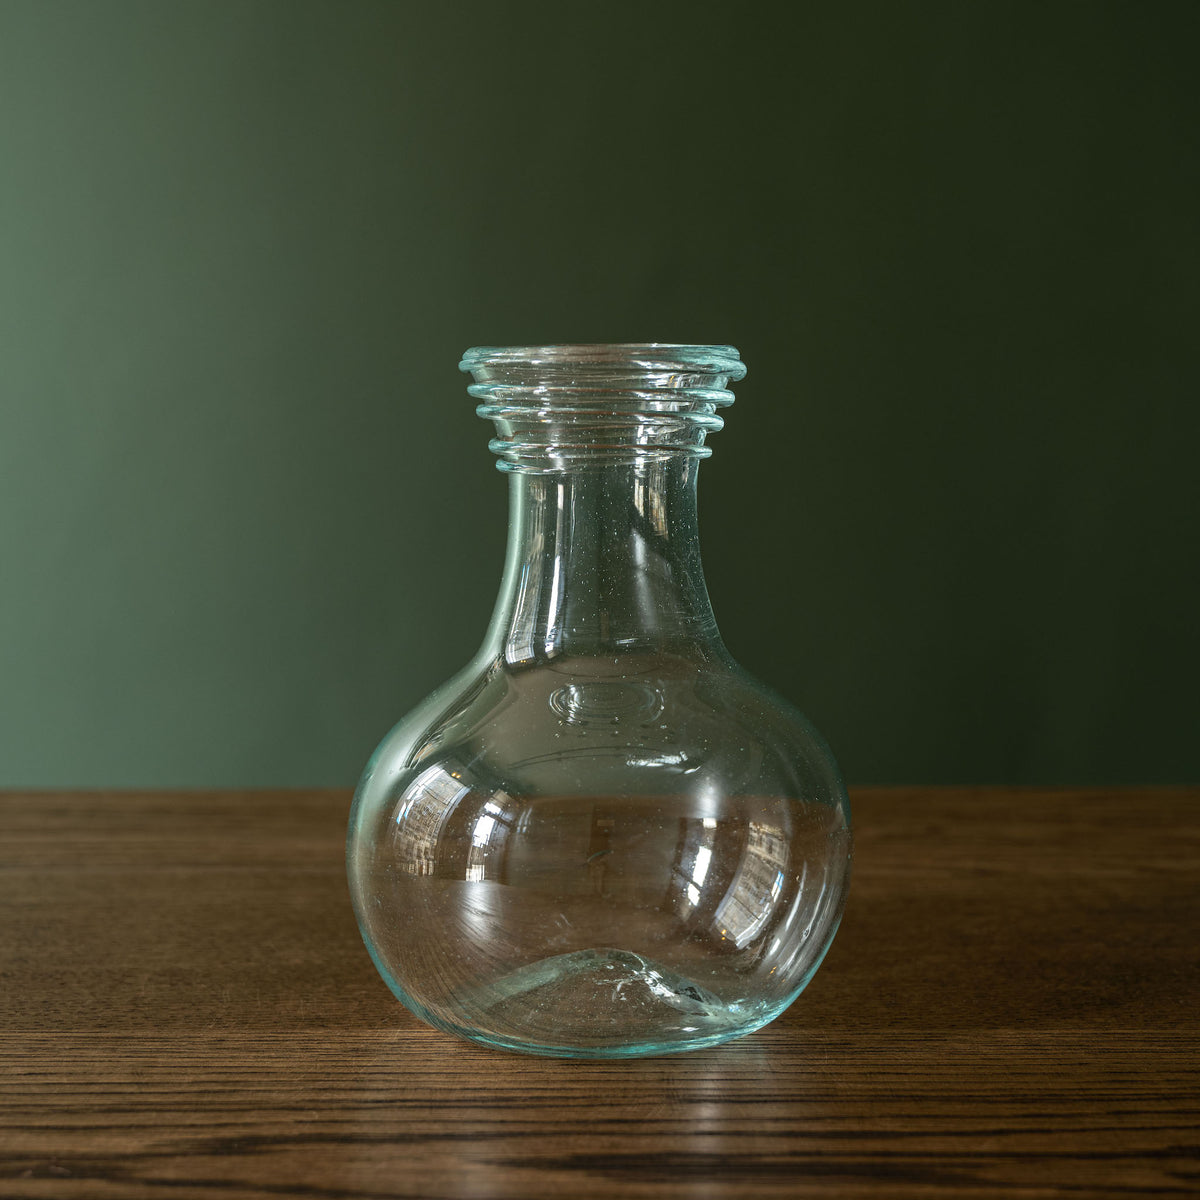 Boite - La Soufflerie Hand blown from recycled glass